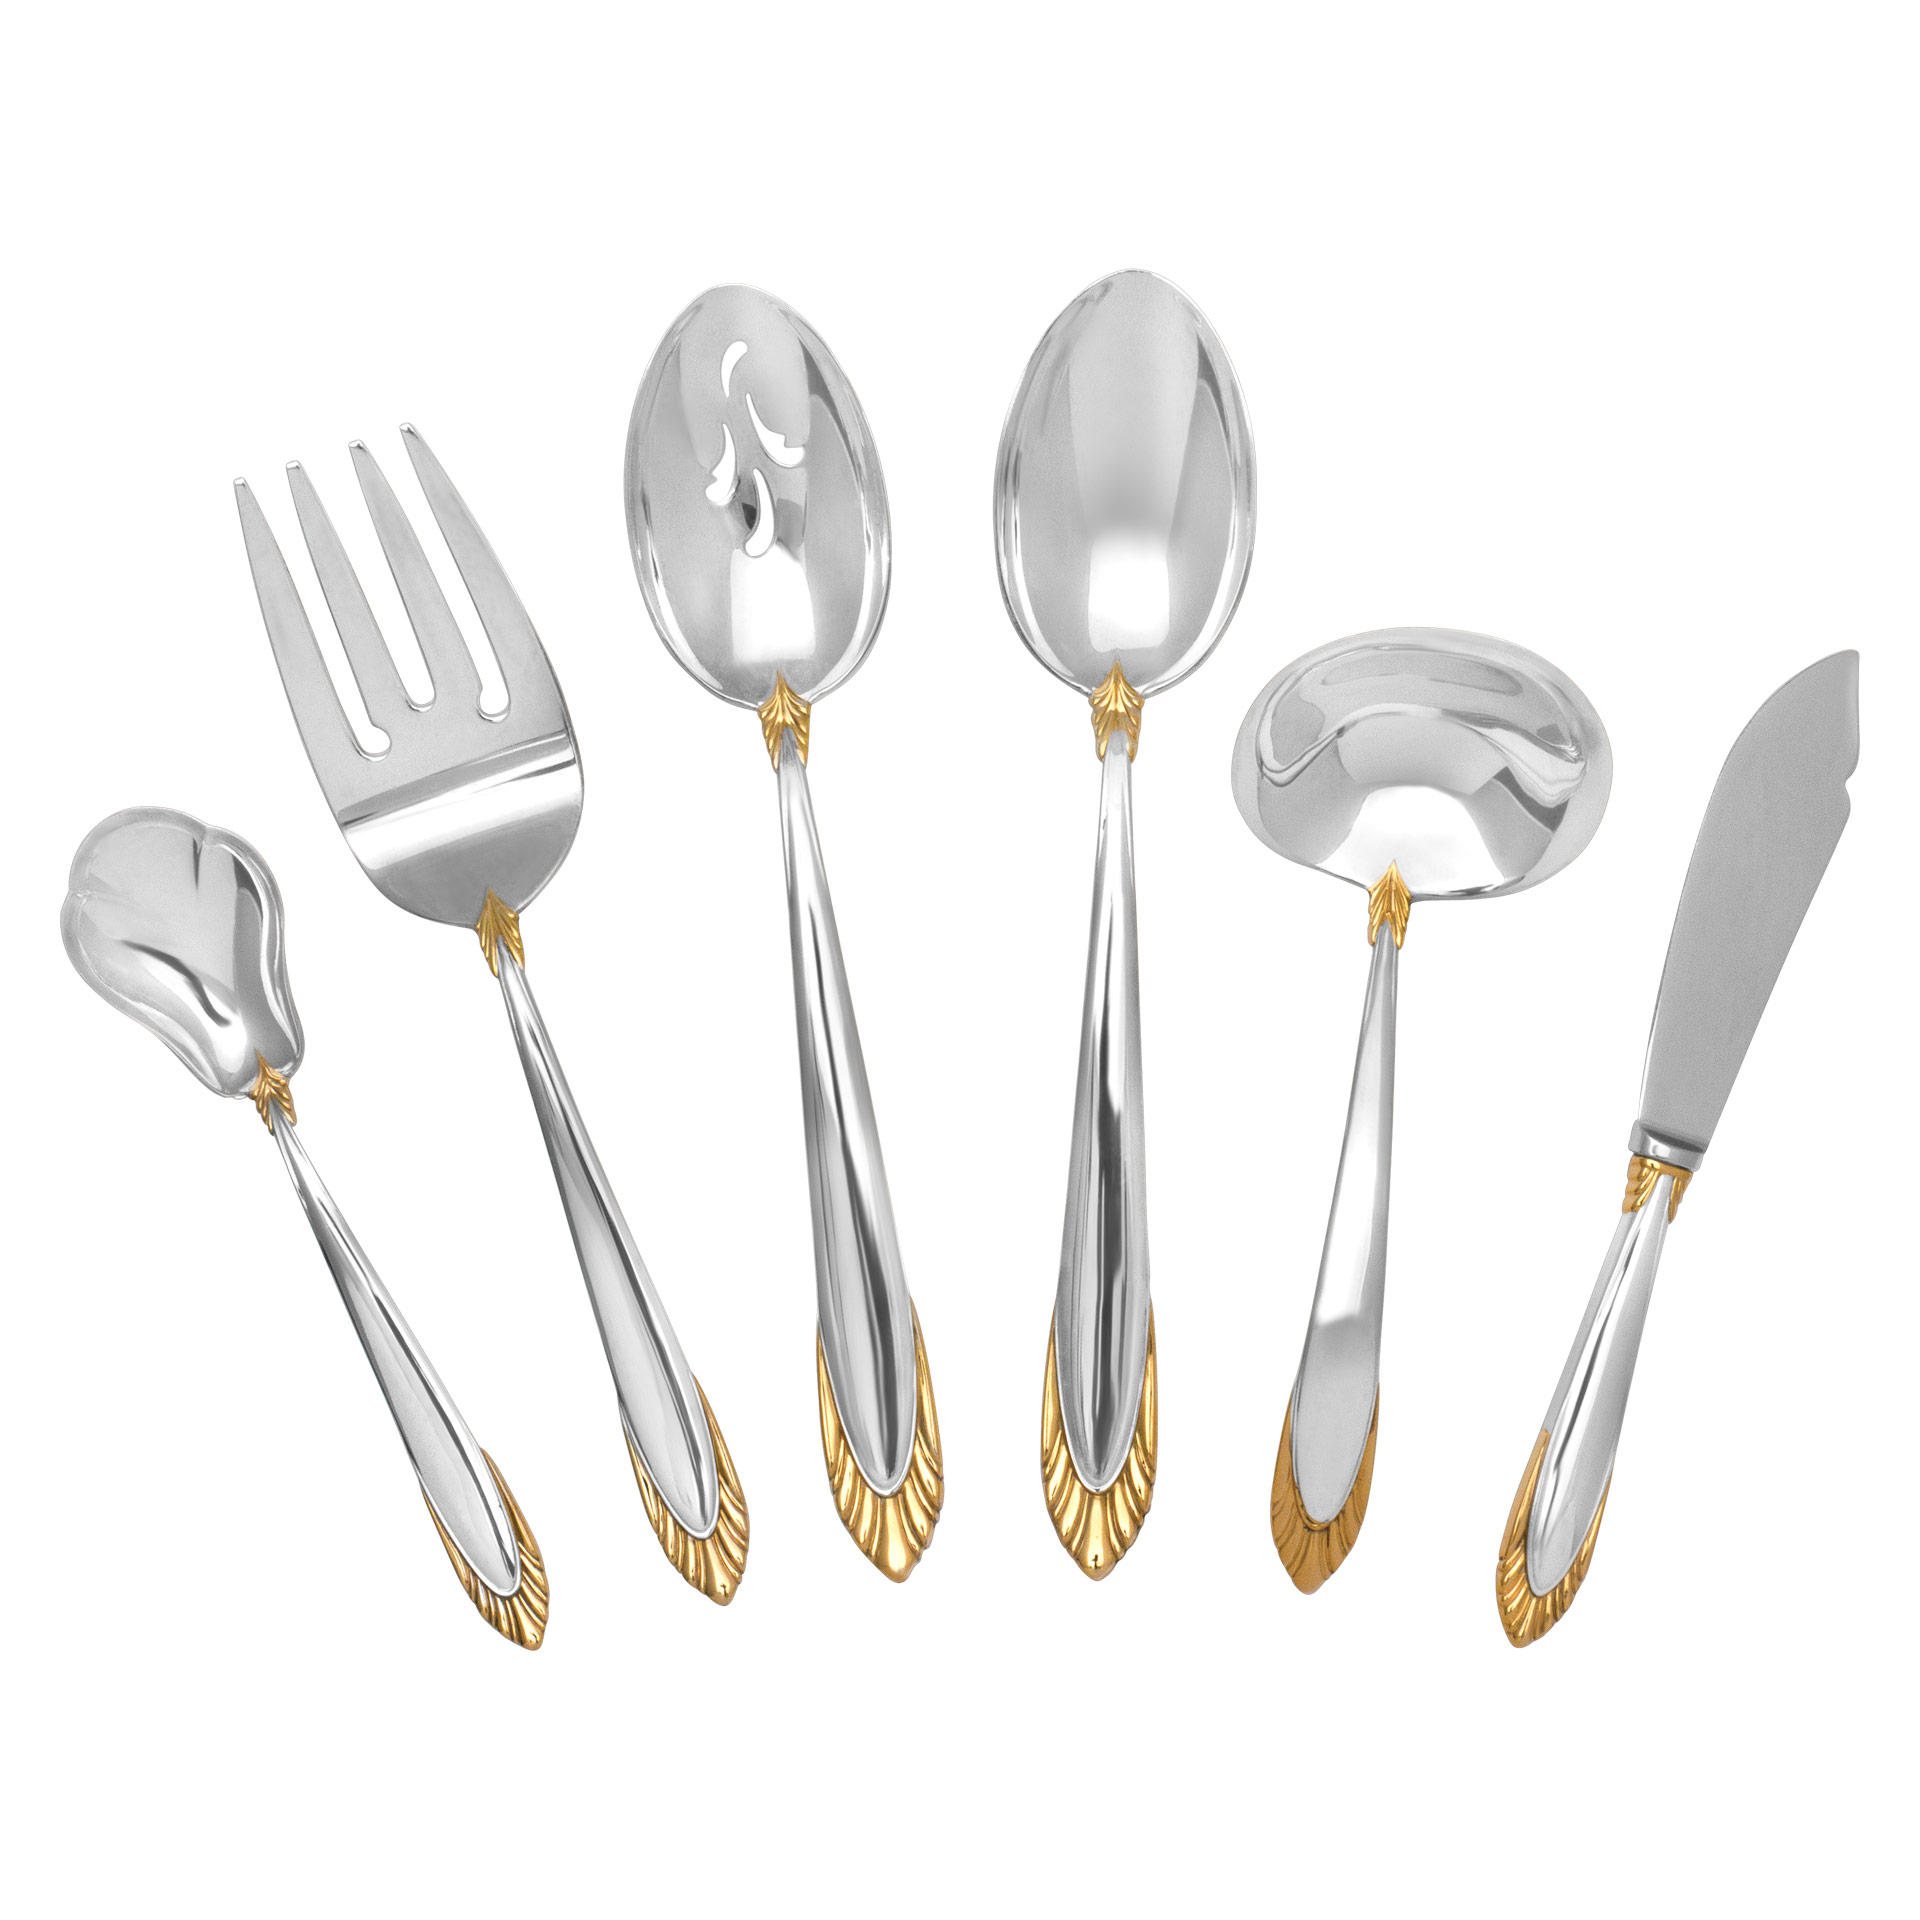 "REGENCY SHELL" flatware sterling silver set, patented in 1989 by Lunt Silversmiths-  6 place setting for 12 + 7 serving pieces-  Over 90 oz troy sterling silver image 3